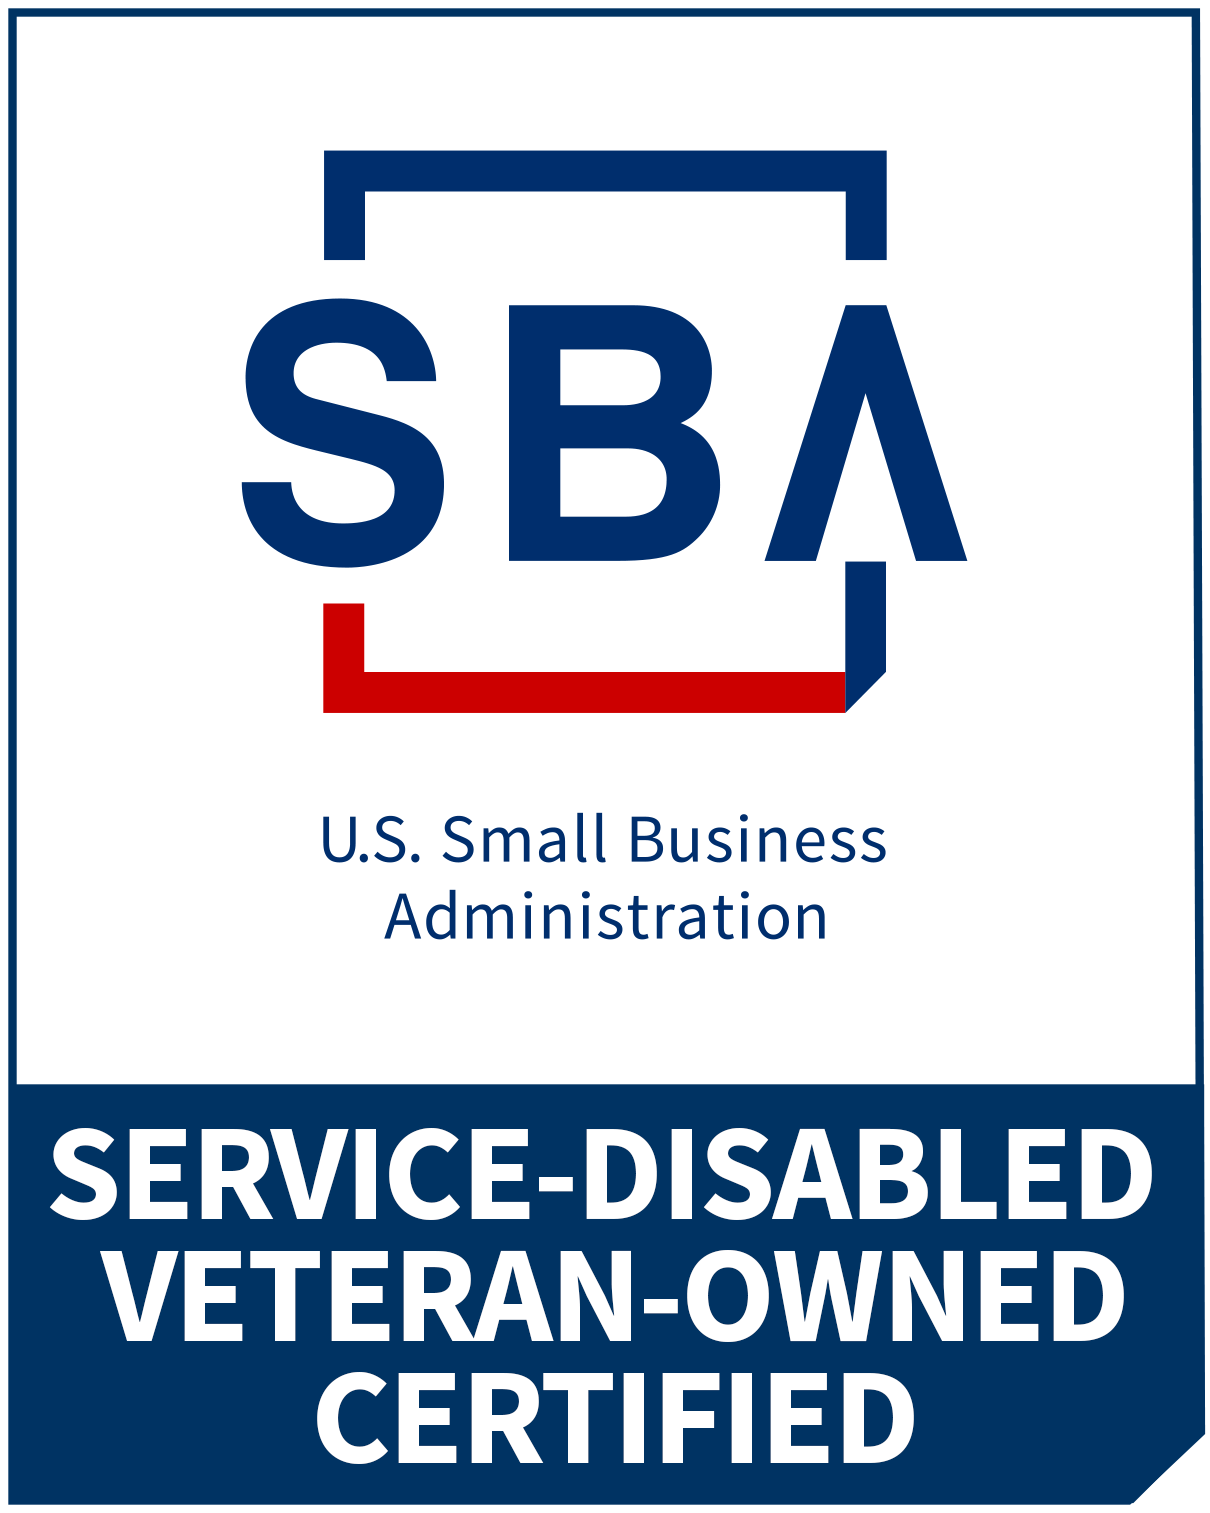 Service Disabled Veteran Owned Certified logo